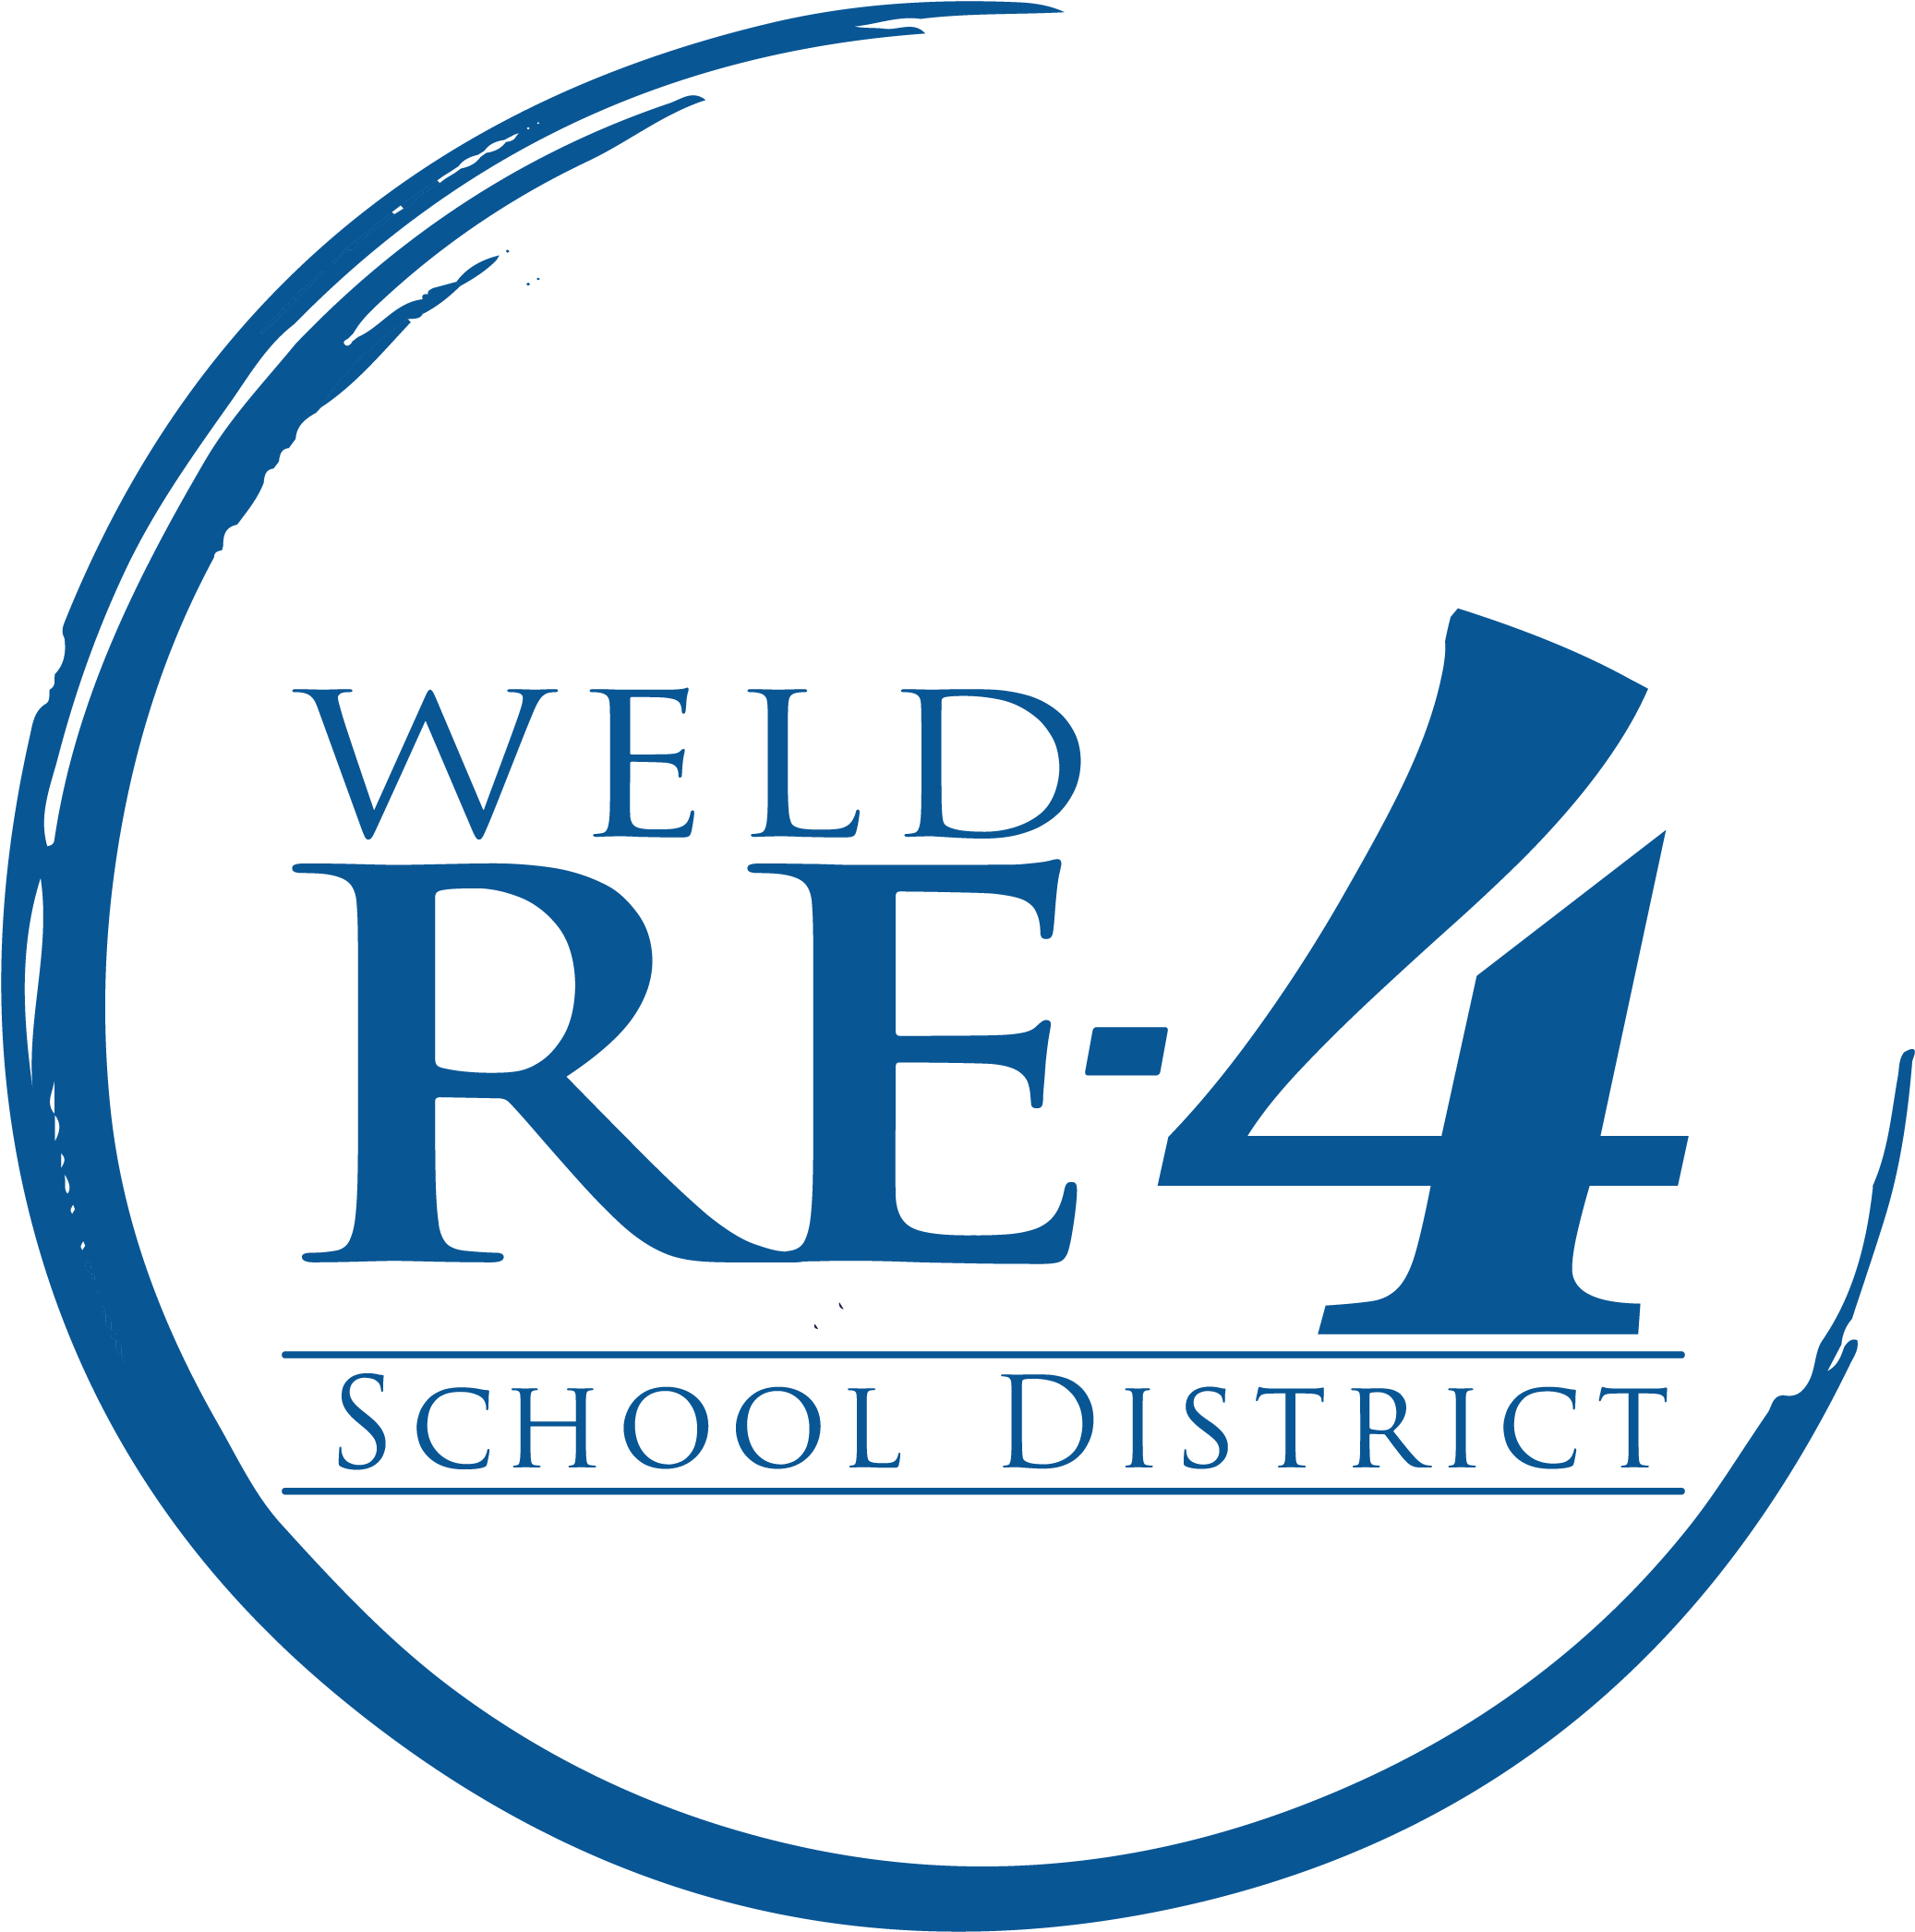 Welcome To Weld Re-4 School District - Bay Area Regional Medical Center (3300x2550)